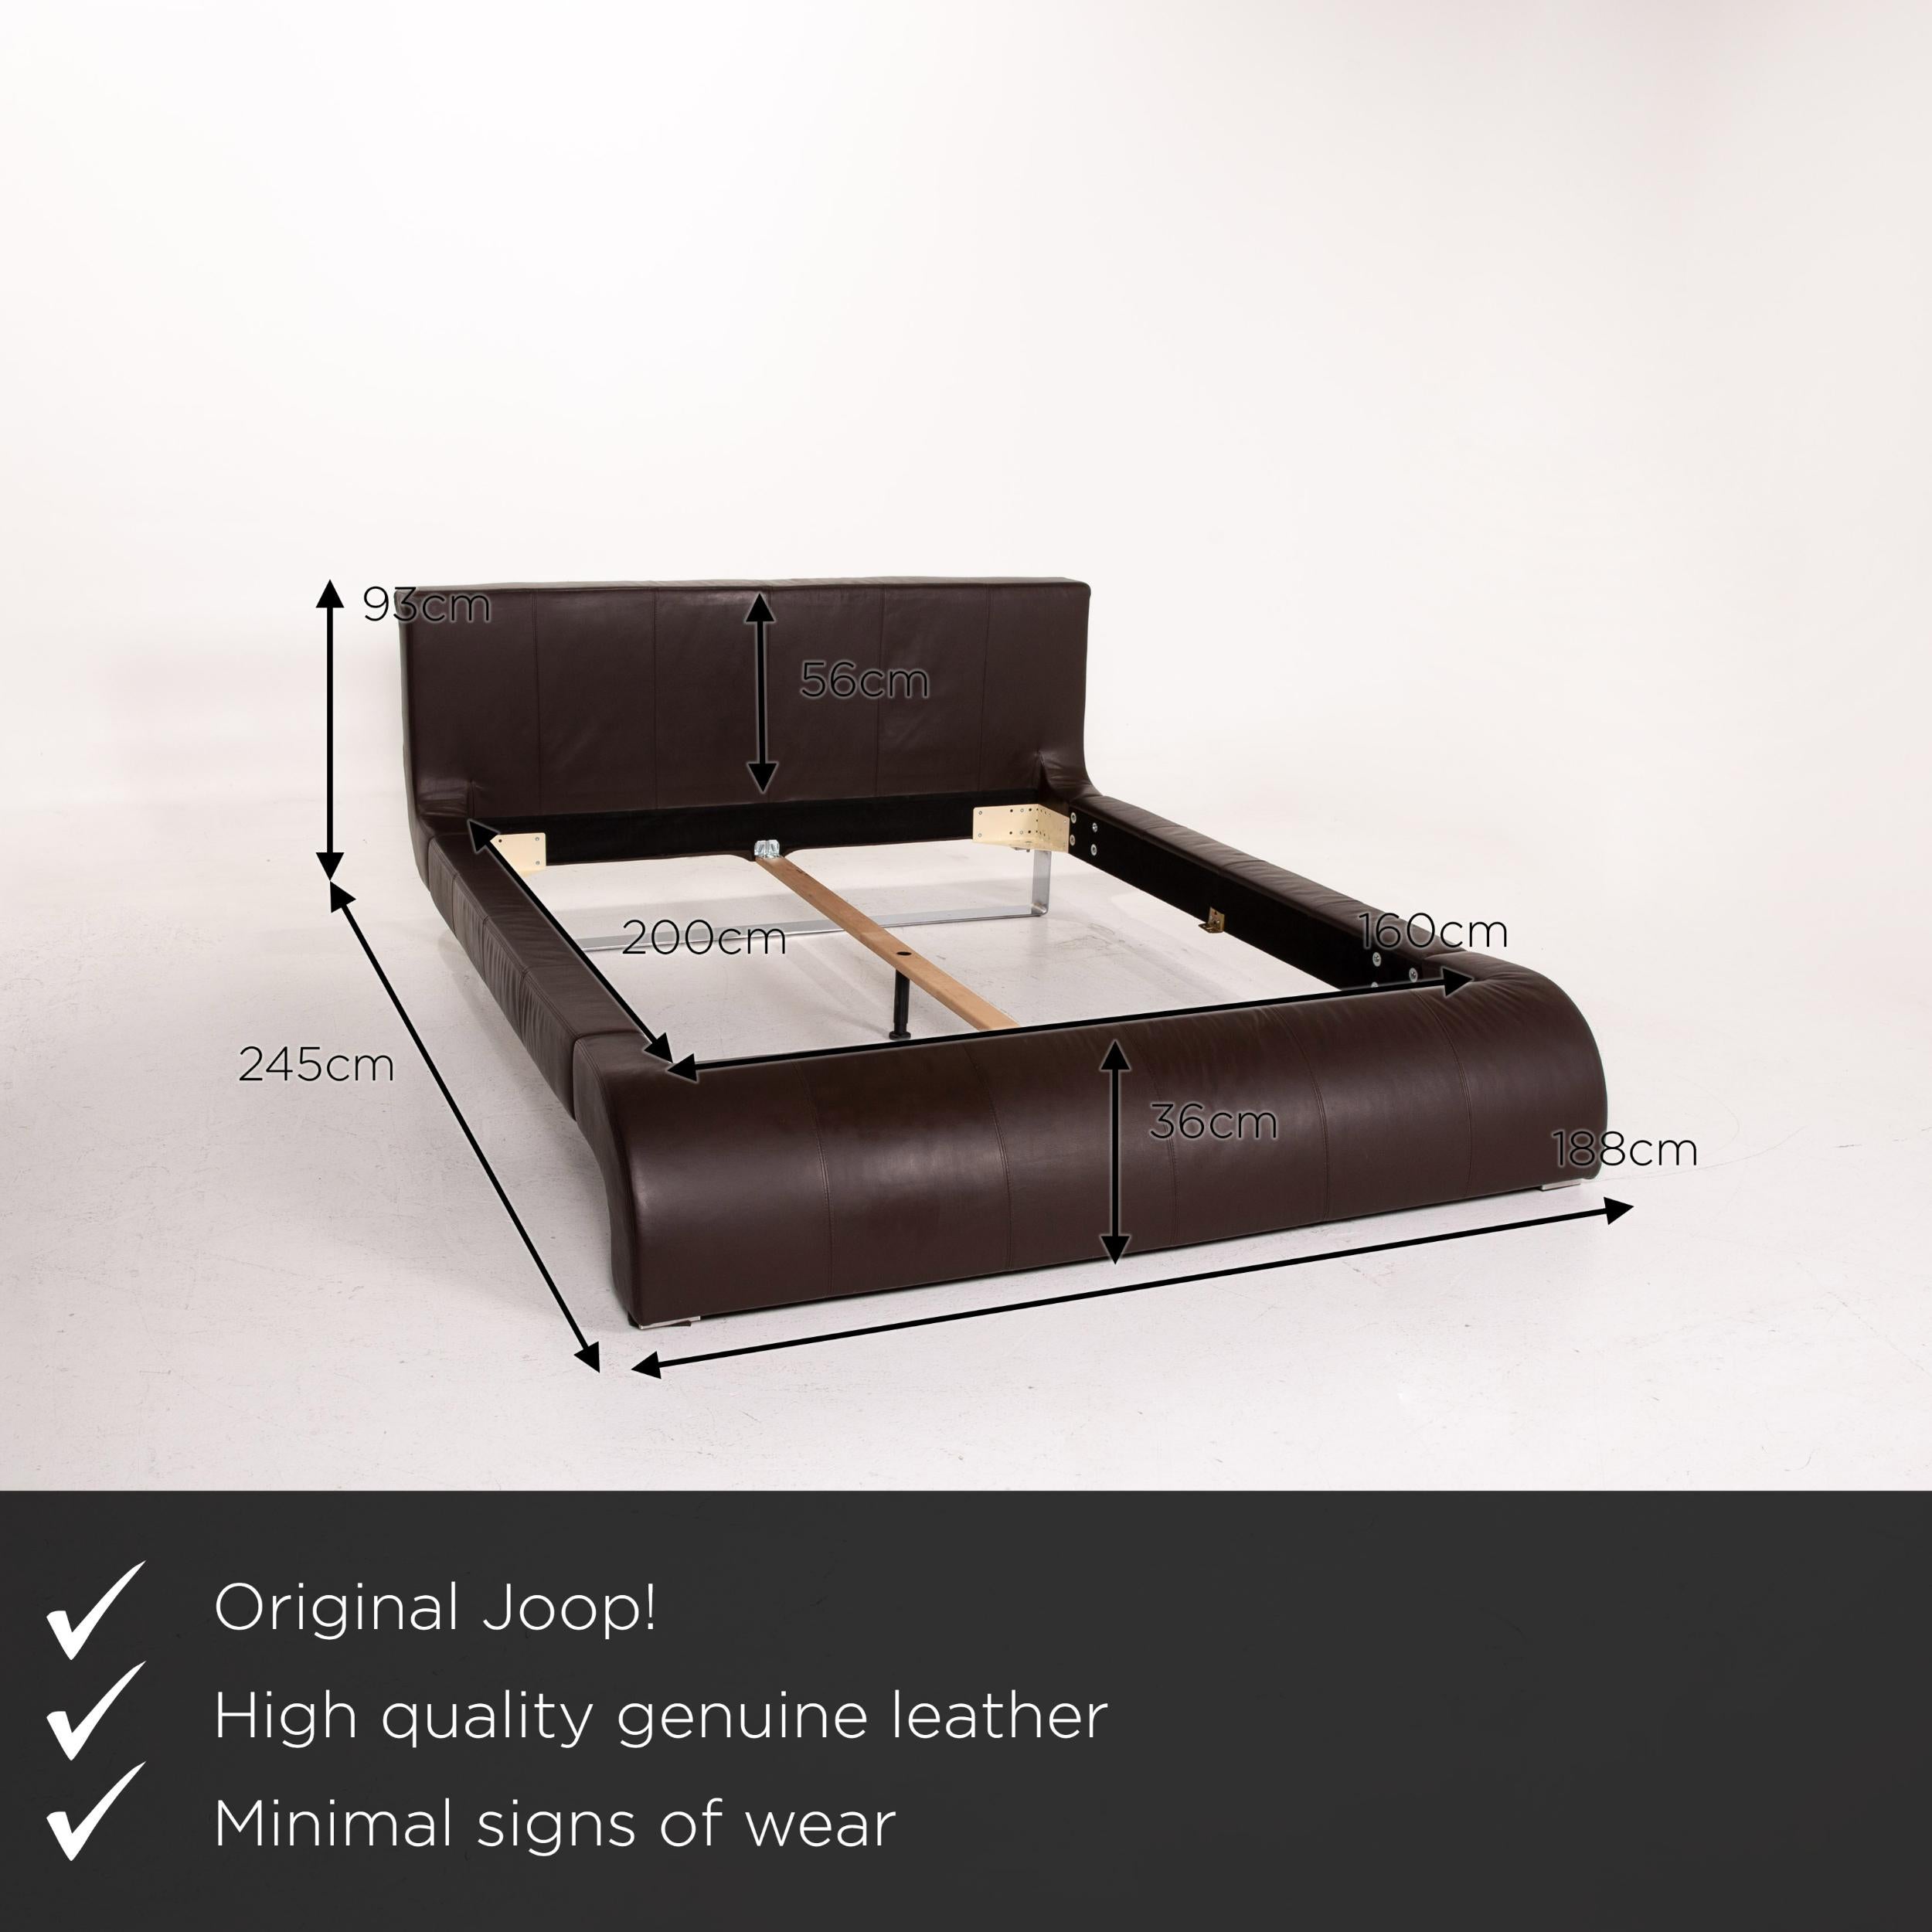 We present to you a Joop! Swing leather double bed brown 160 x 200cm dark brown bed.

 
Product measurements in centimeters:
 

 
Depth 245
Width 188
Height 93
Seat height 36
Seat depth 200
Seat width 160
Back height 56.
  